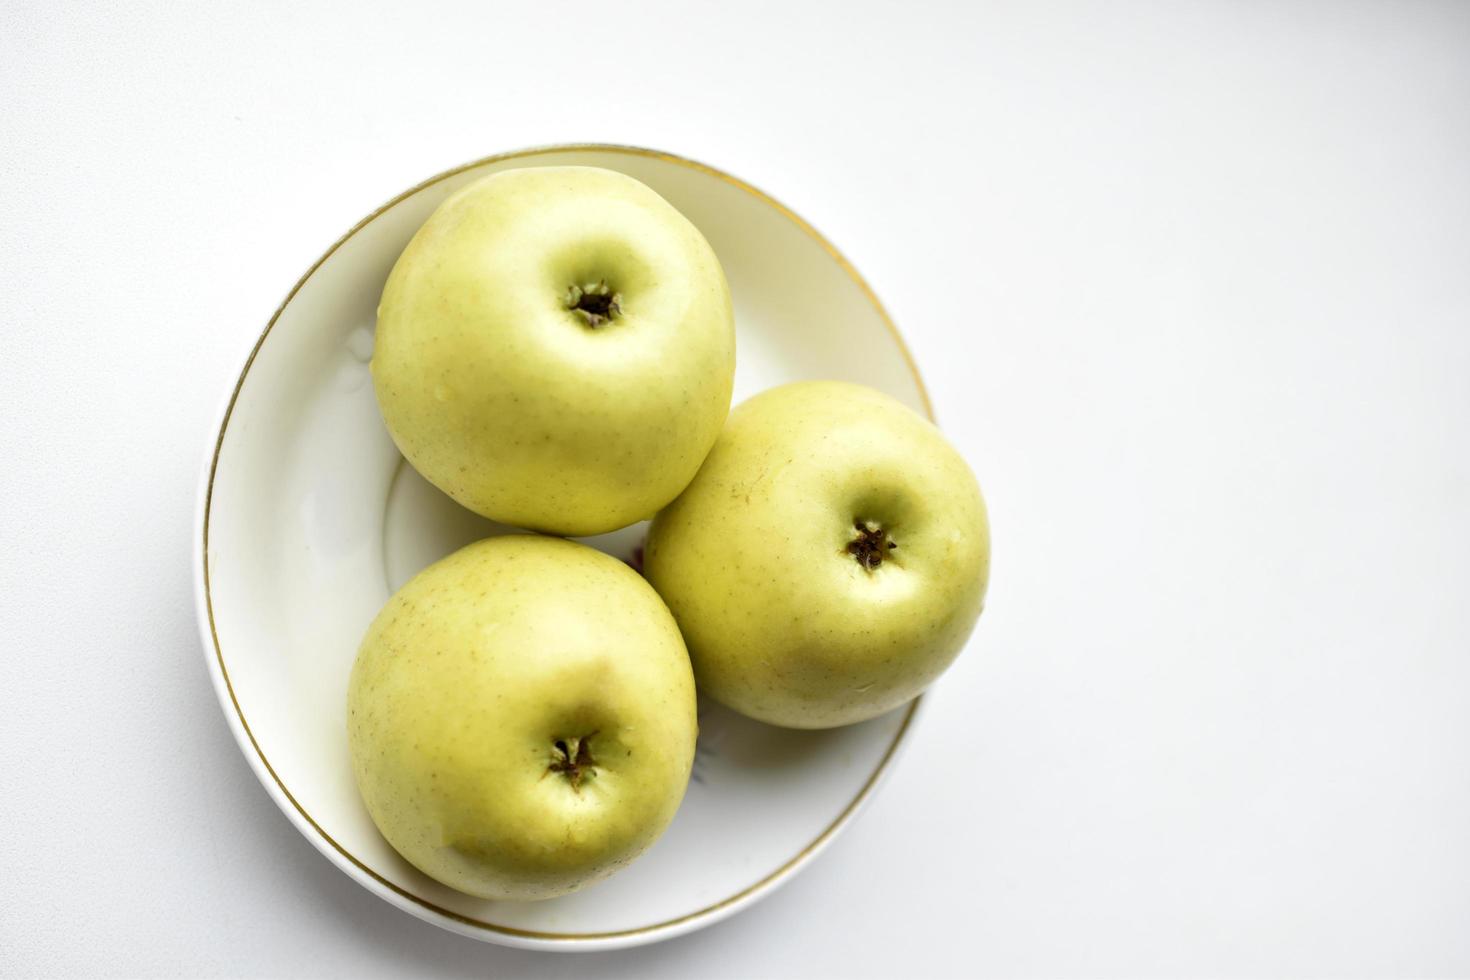 Three green apples on a white plate photo